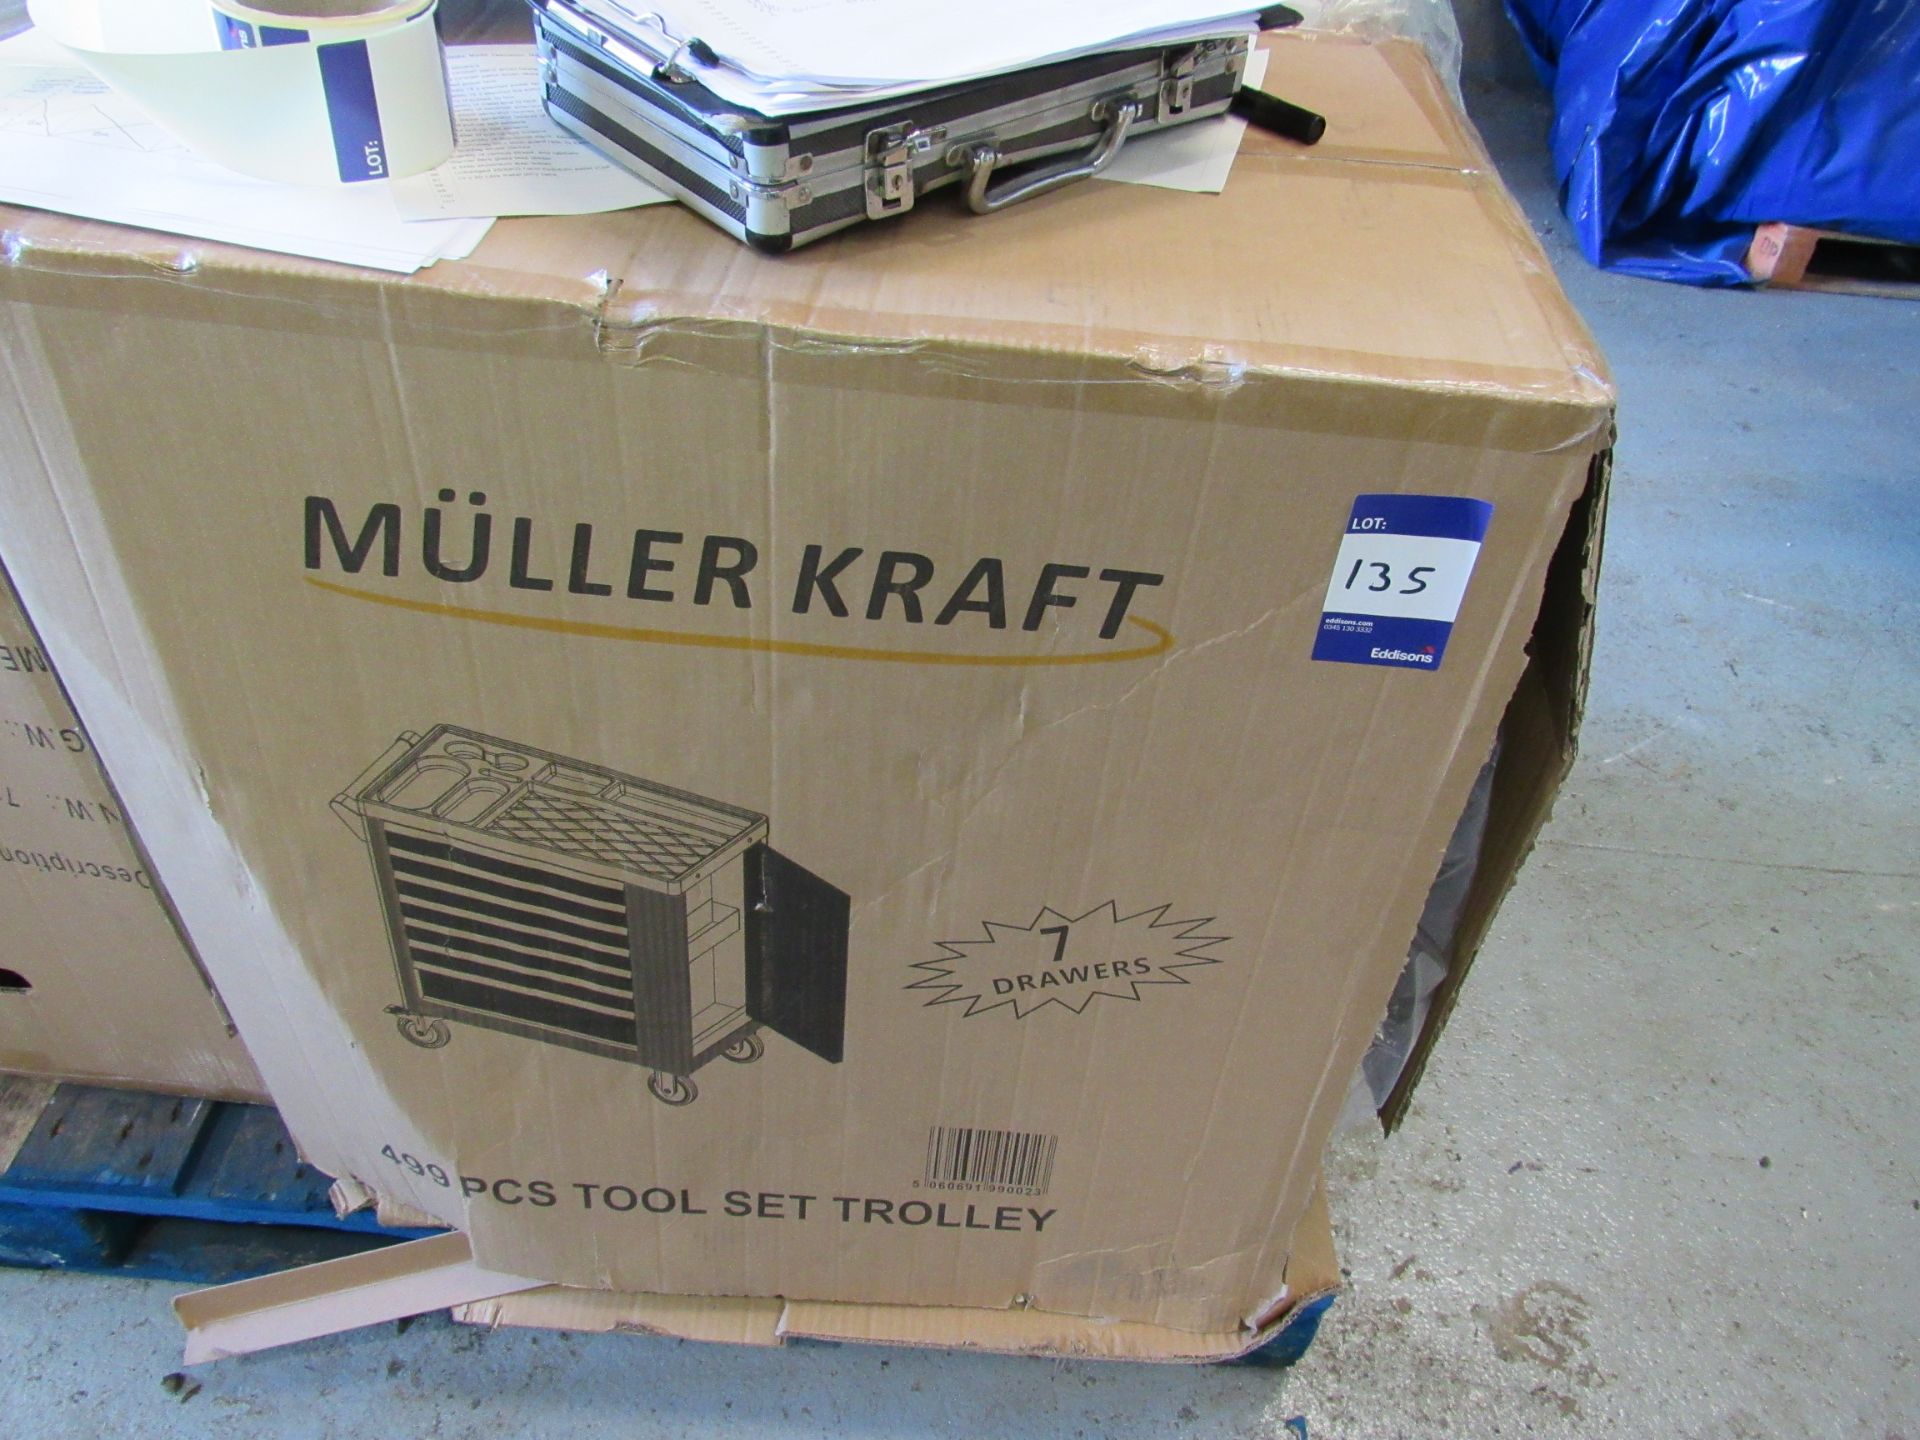 Muller Kraft 7 drawer roller tool chest with approx. 250 tools, Boxed and unused